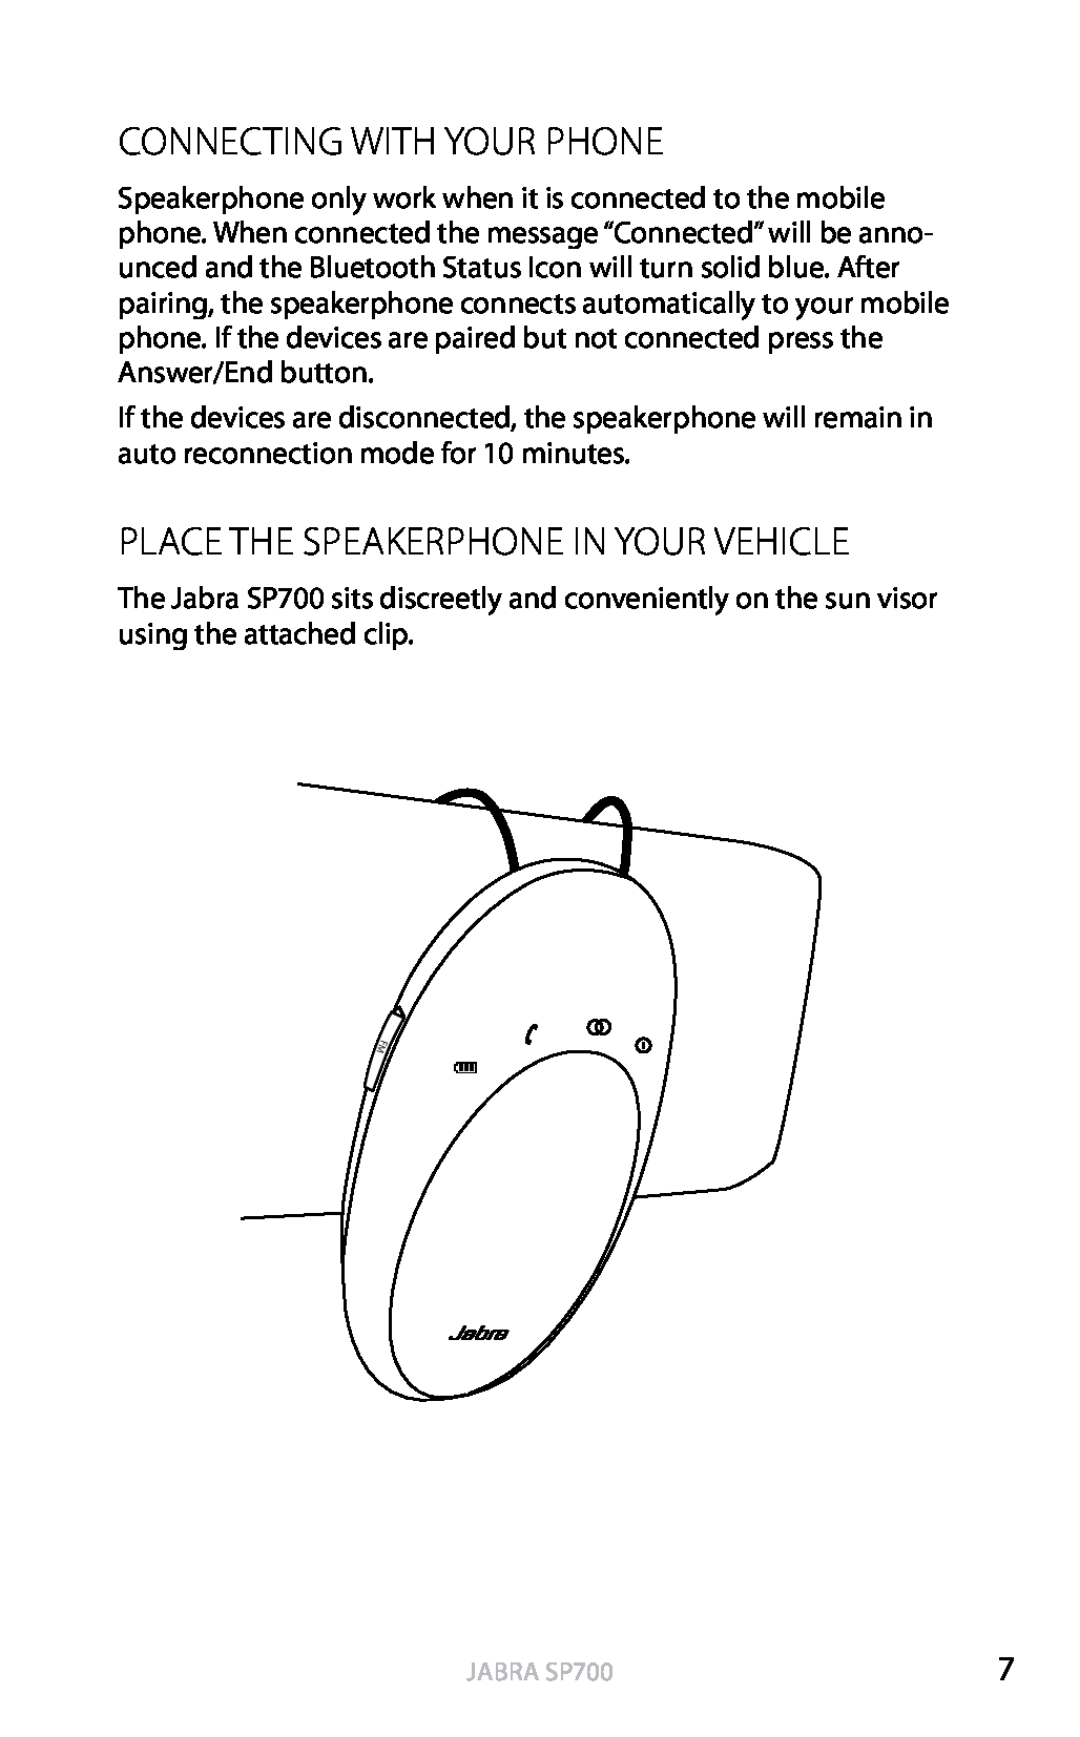 Jabra SP700 user manual Connecting with your phone, Place the speakerphone in your vehicle, english 